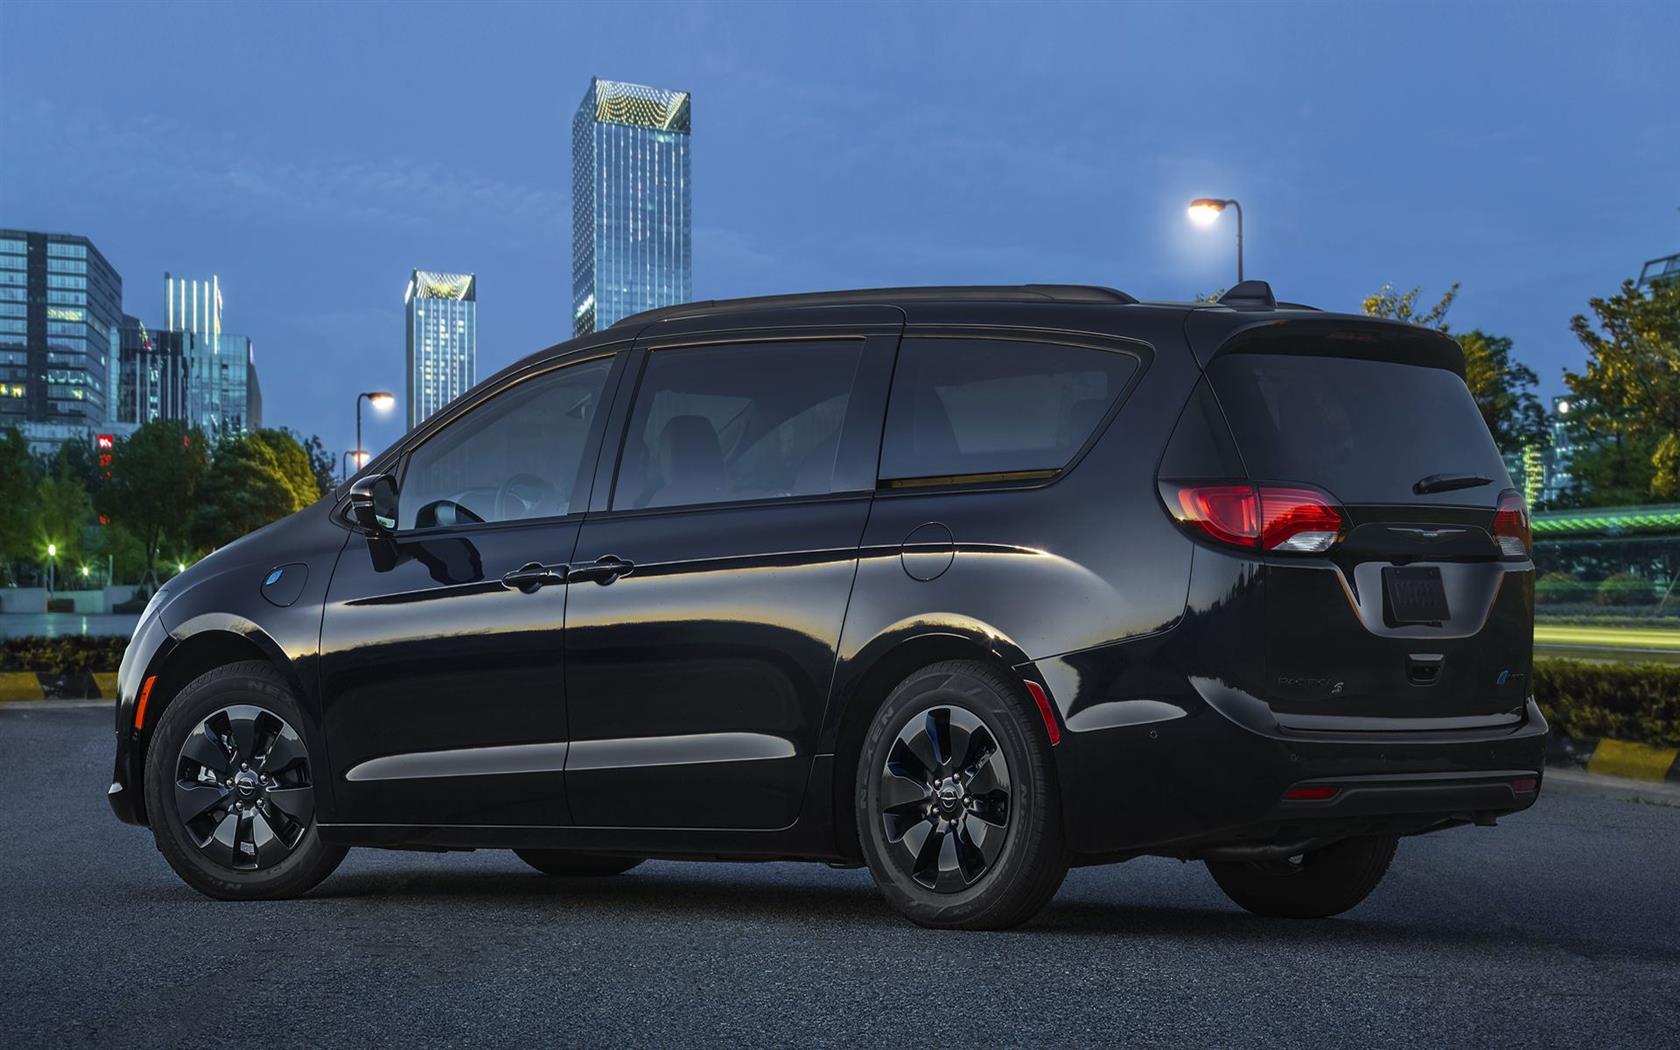 2019 Chrysler Pacifica Hybrid S Appearance Package